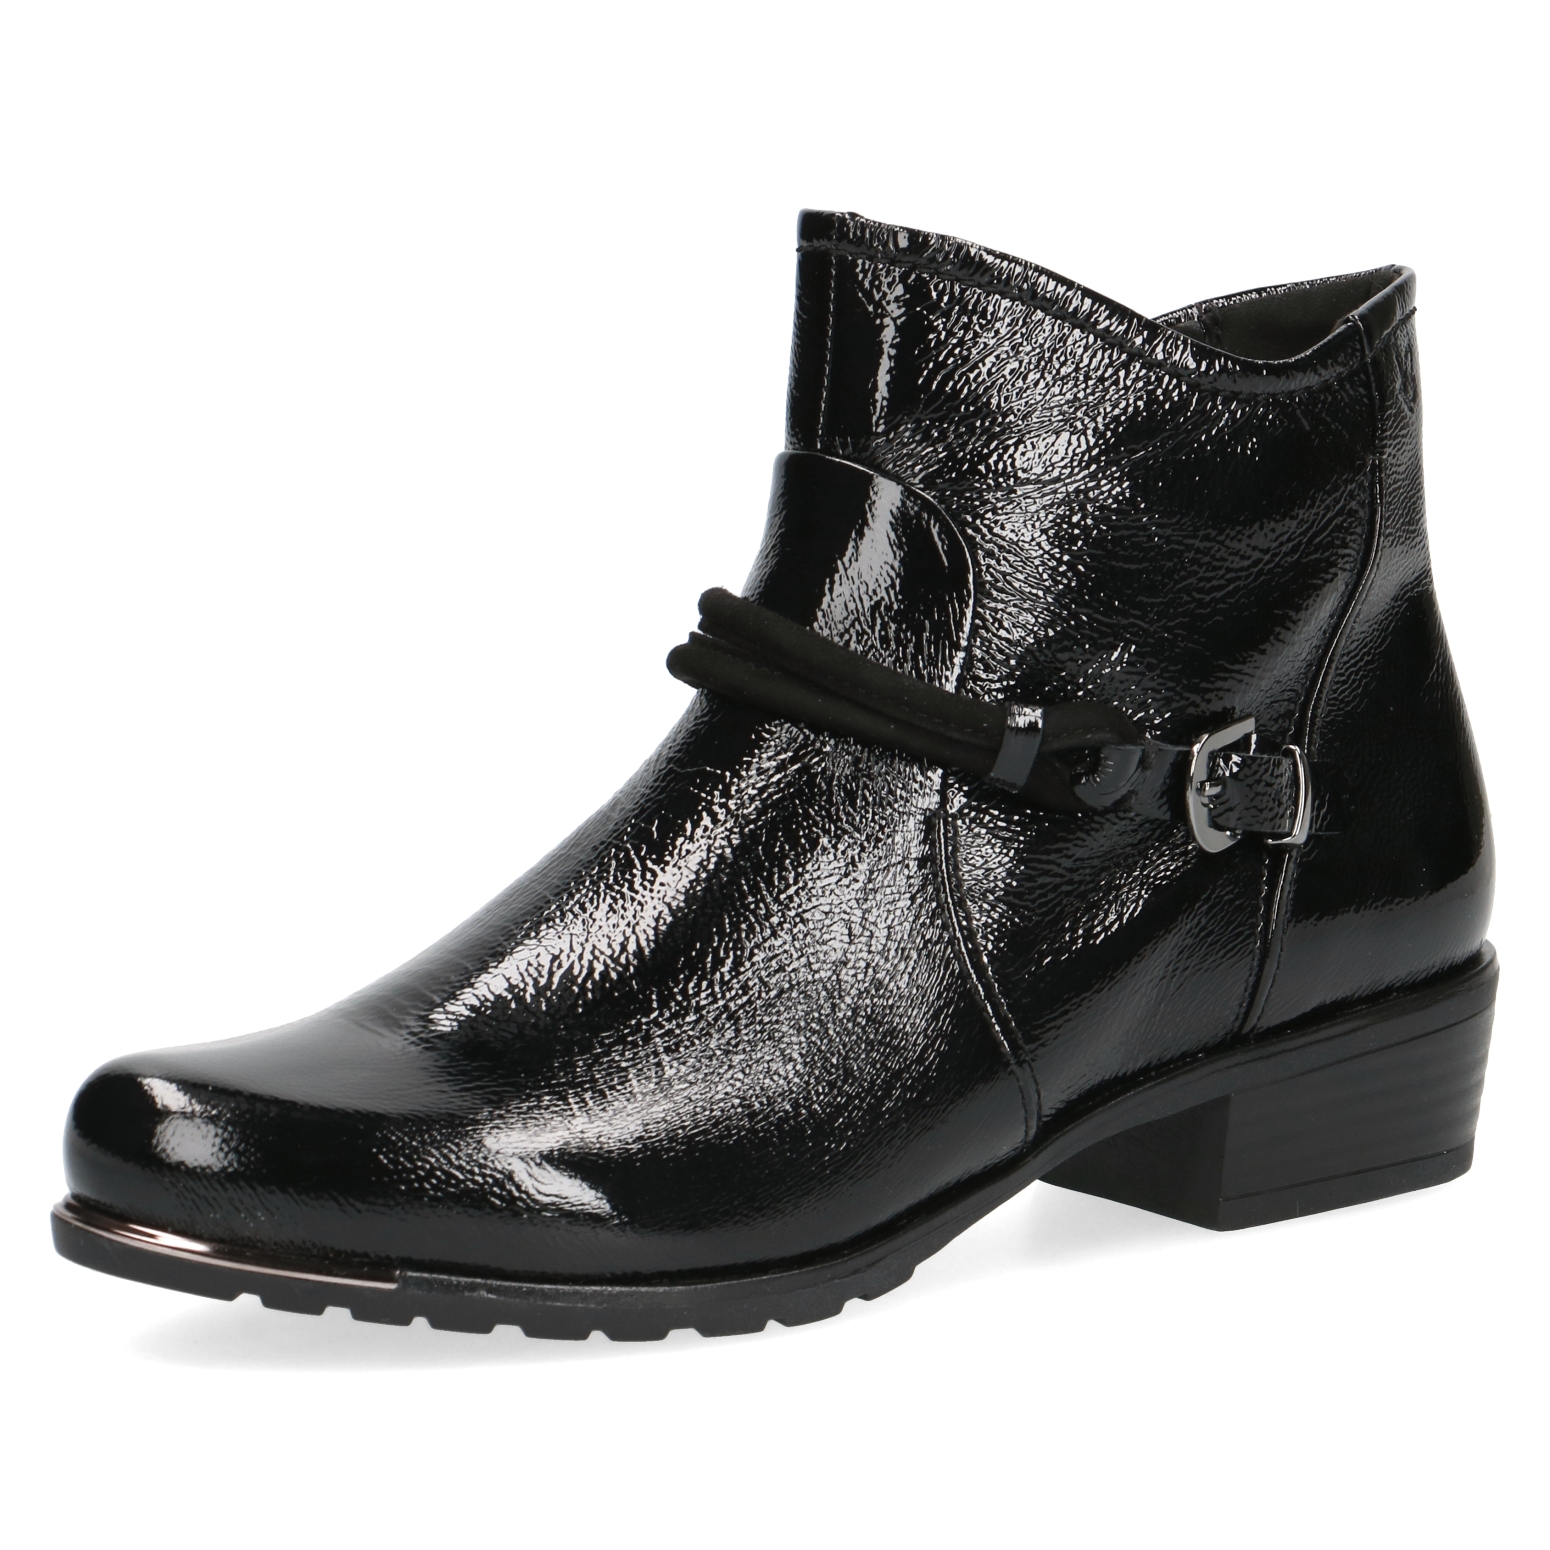 Ankle Boots - Black Patent leather